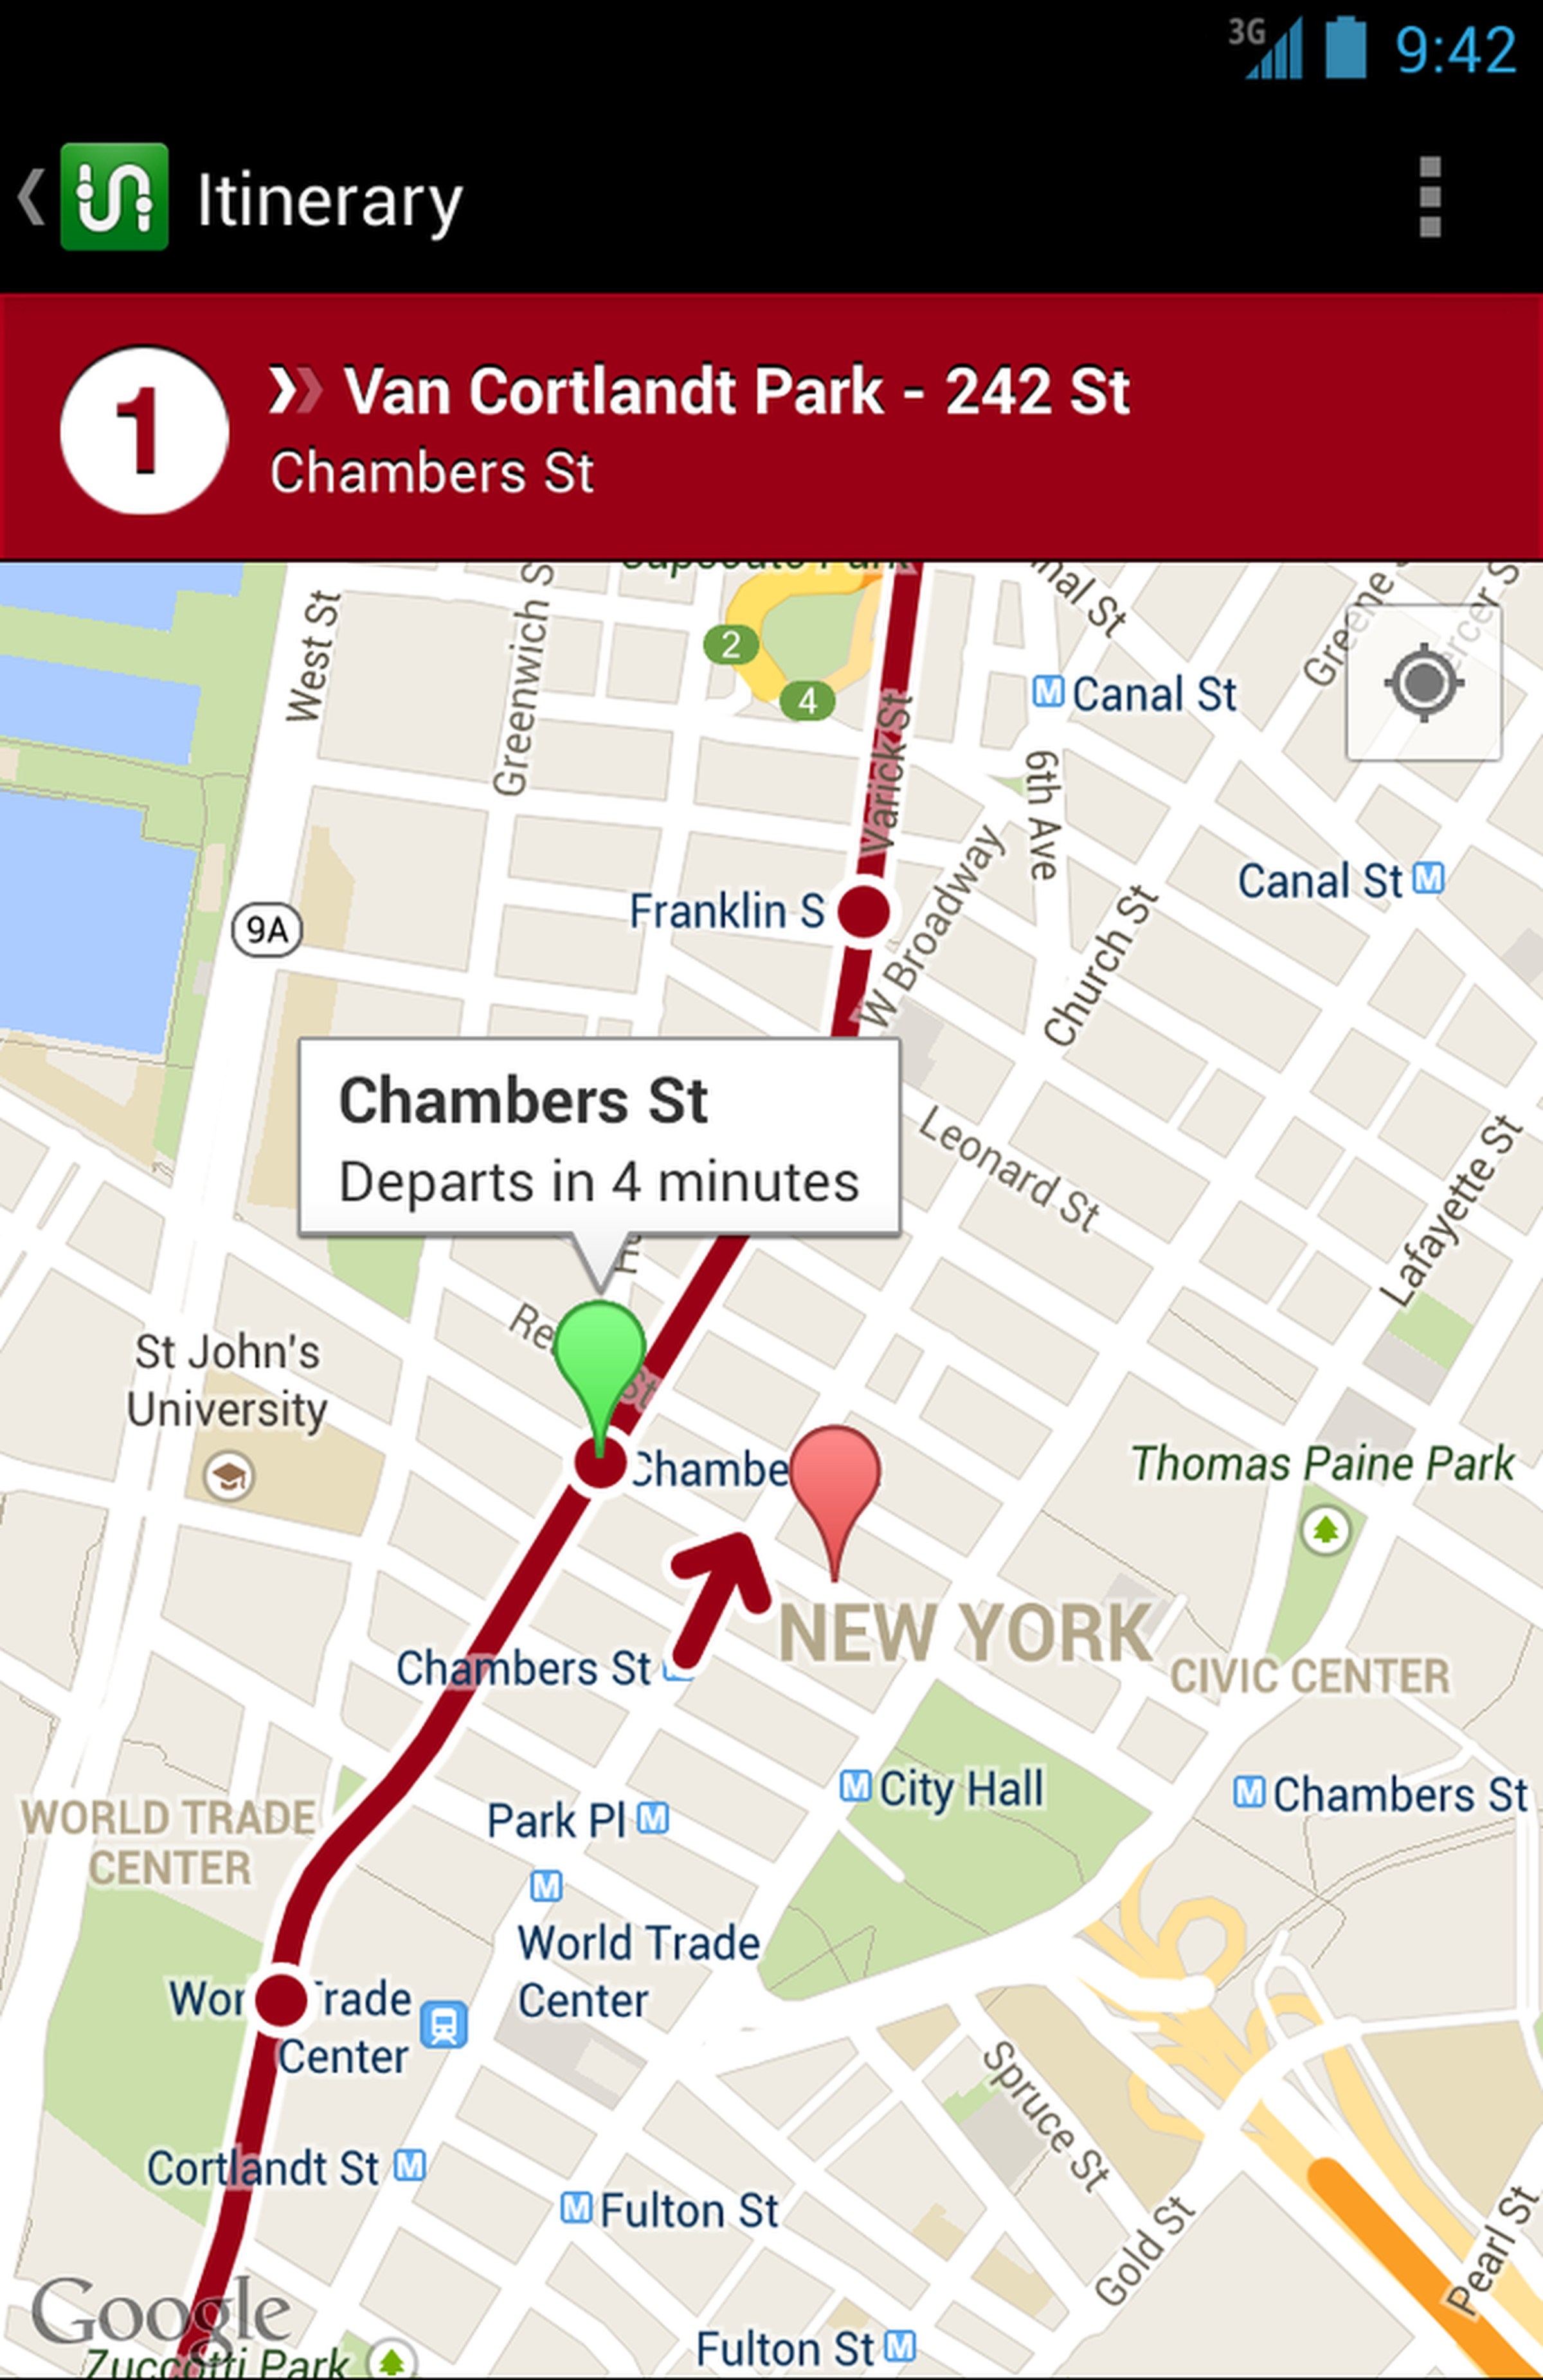 Transit for Android screenshots